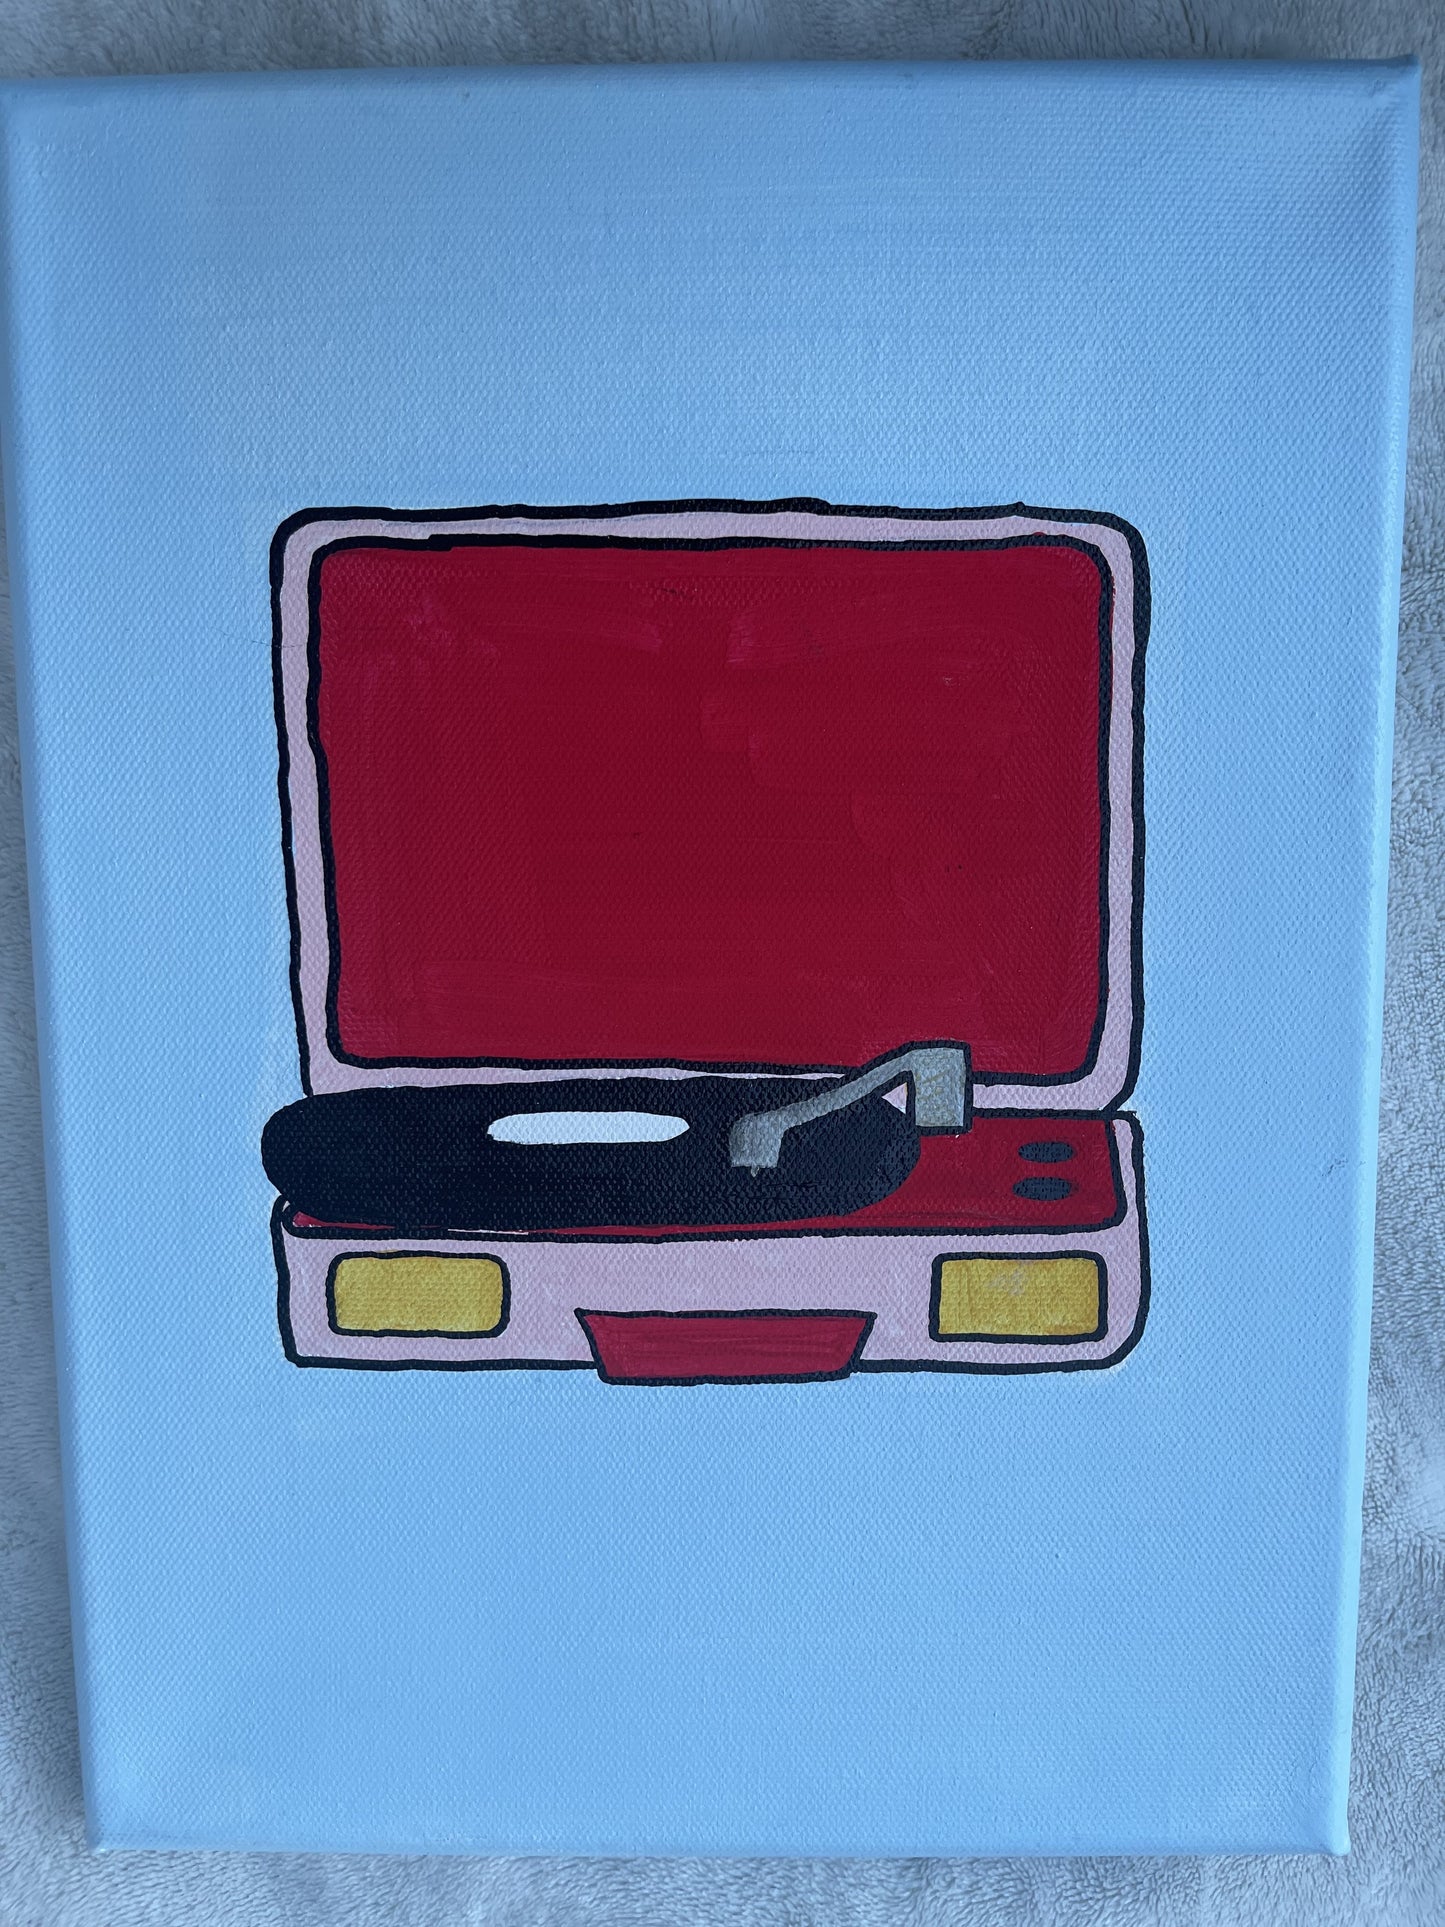 Record Player 90s Theme by em_gem_canvases